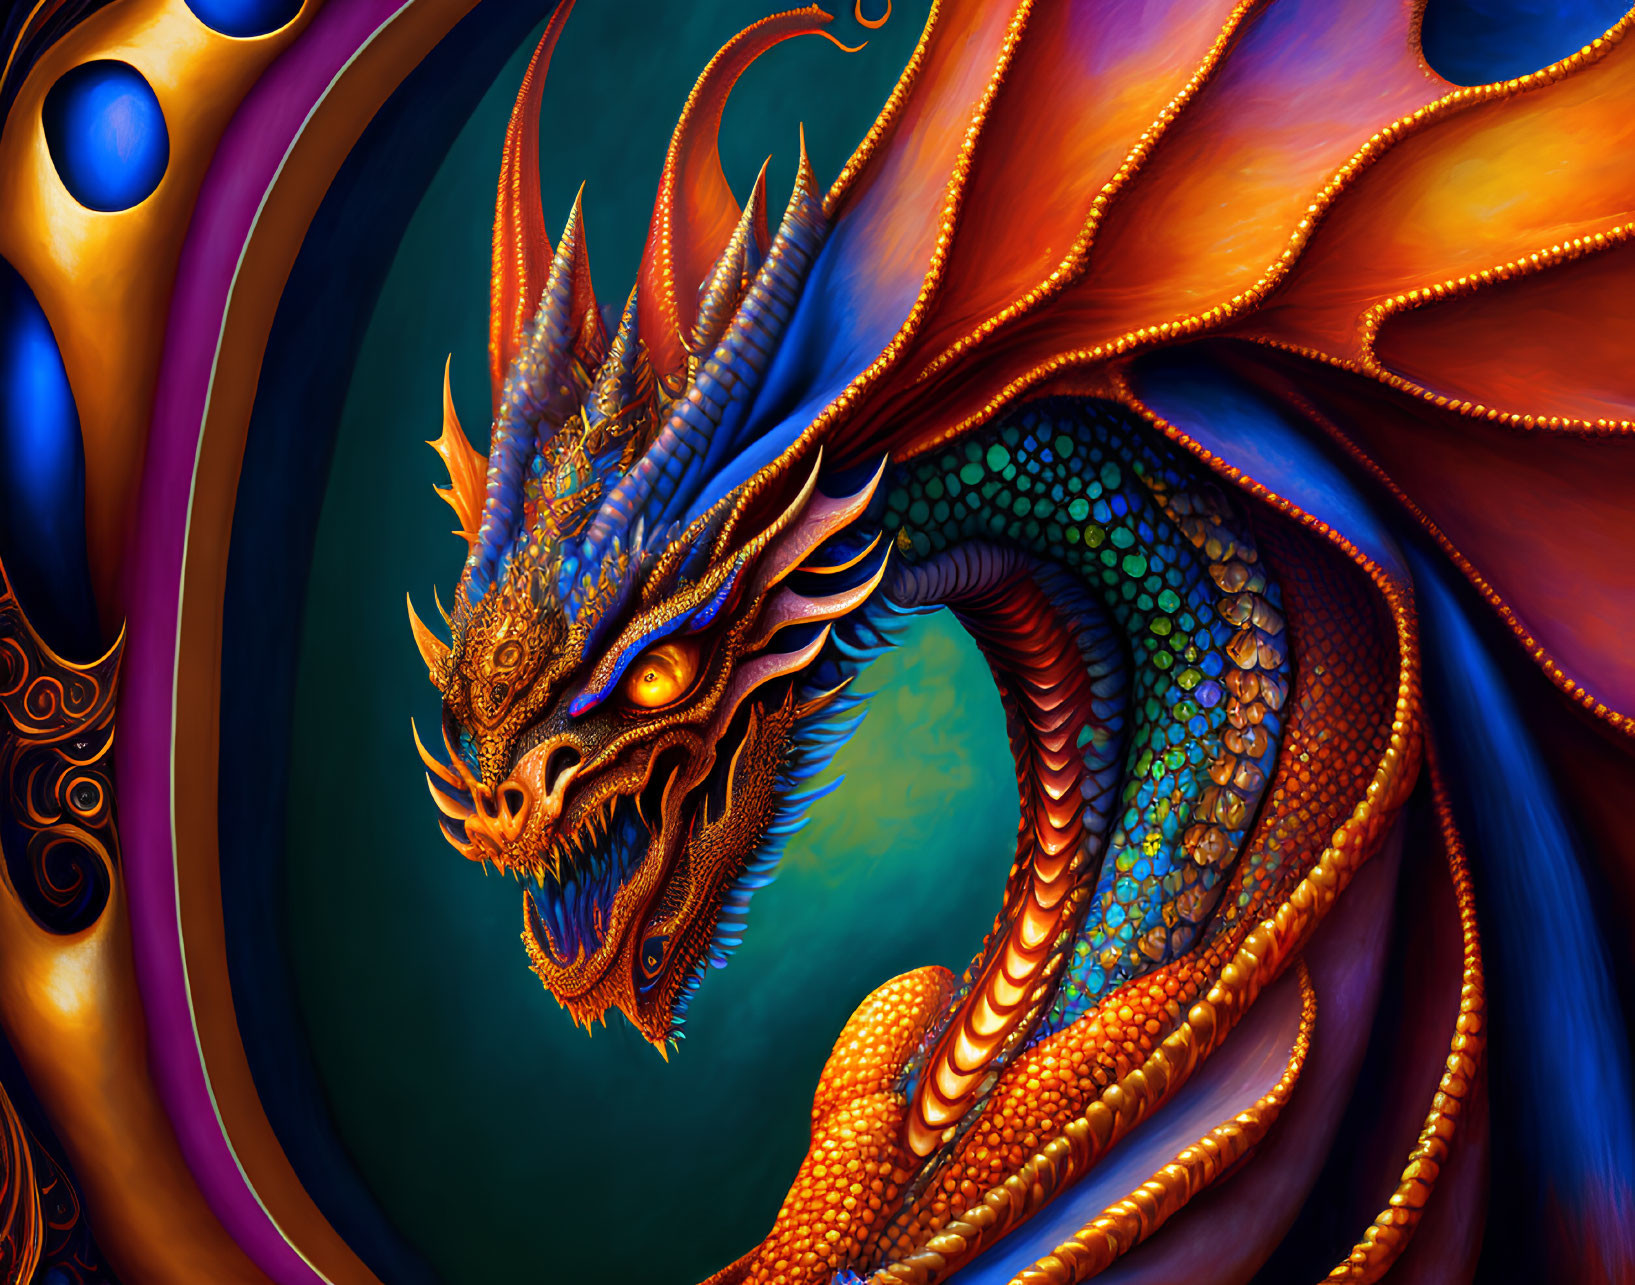 Detailed illustration of vibrant dragon with orange scales and fiery eyes